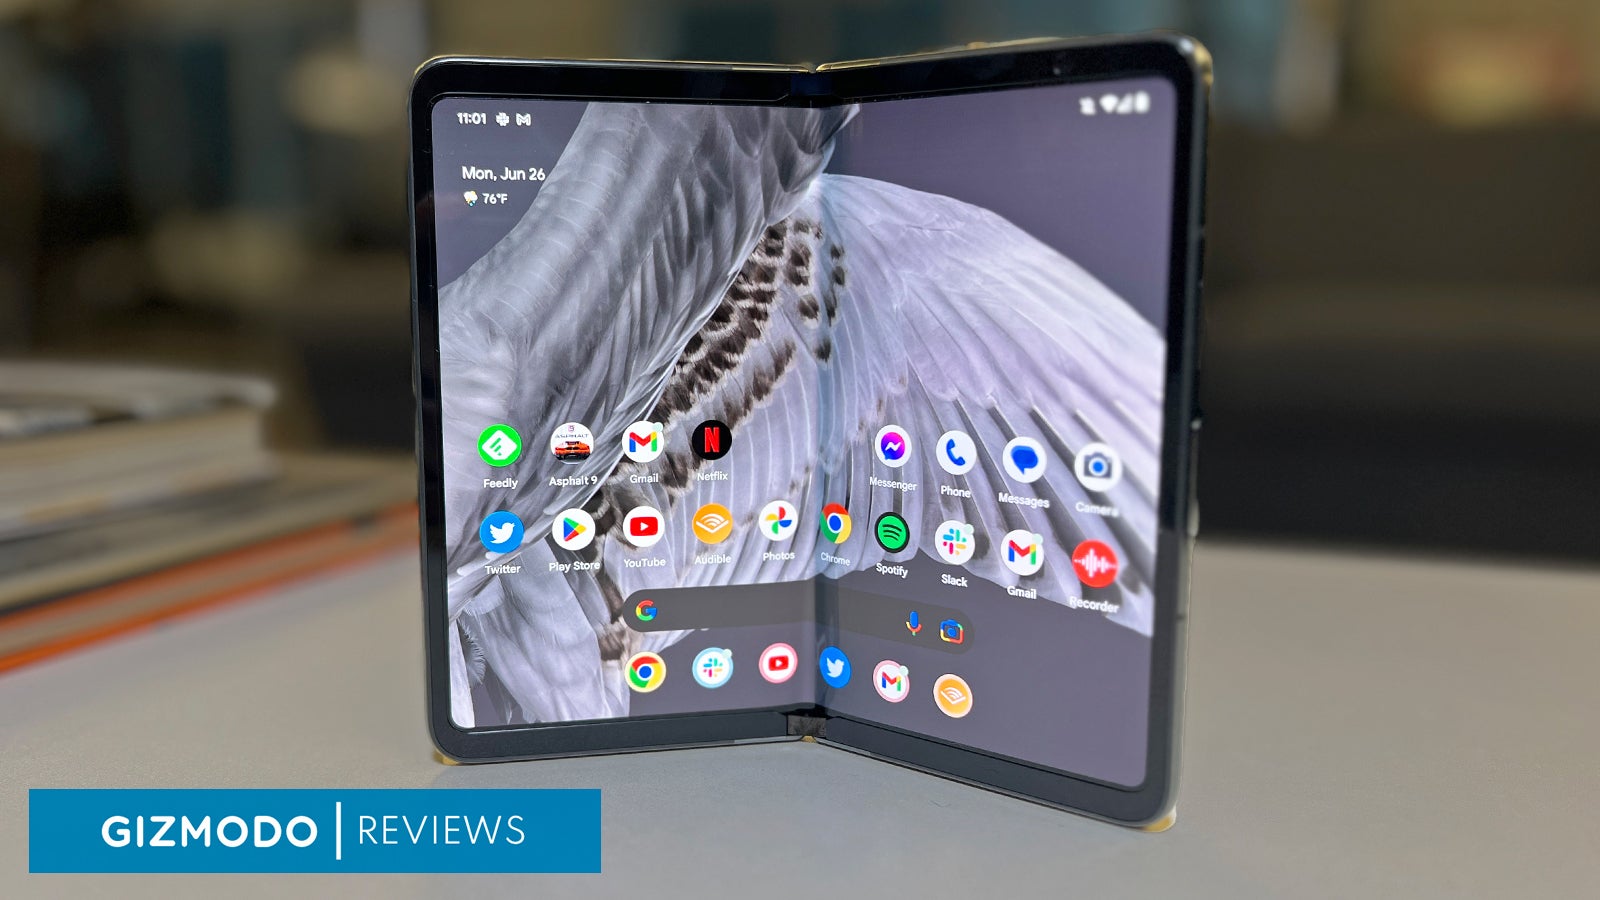 The Google Pixel Fold has a great form factor for holding in the hand, but the large crease bezels make it less than ideal for streaming video. (Photo: Dan Ackerman / Gizmodo)